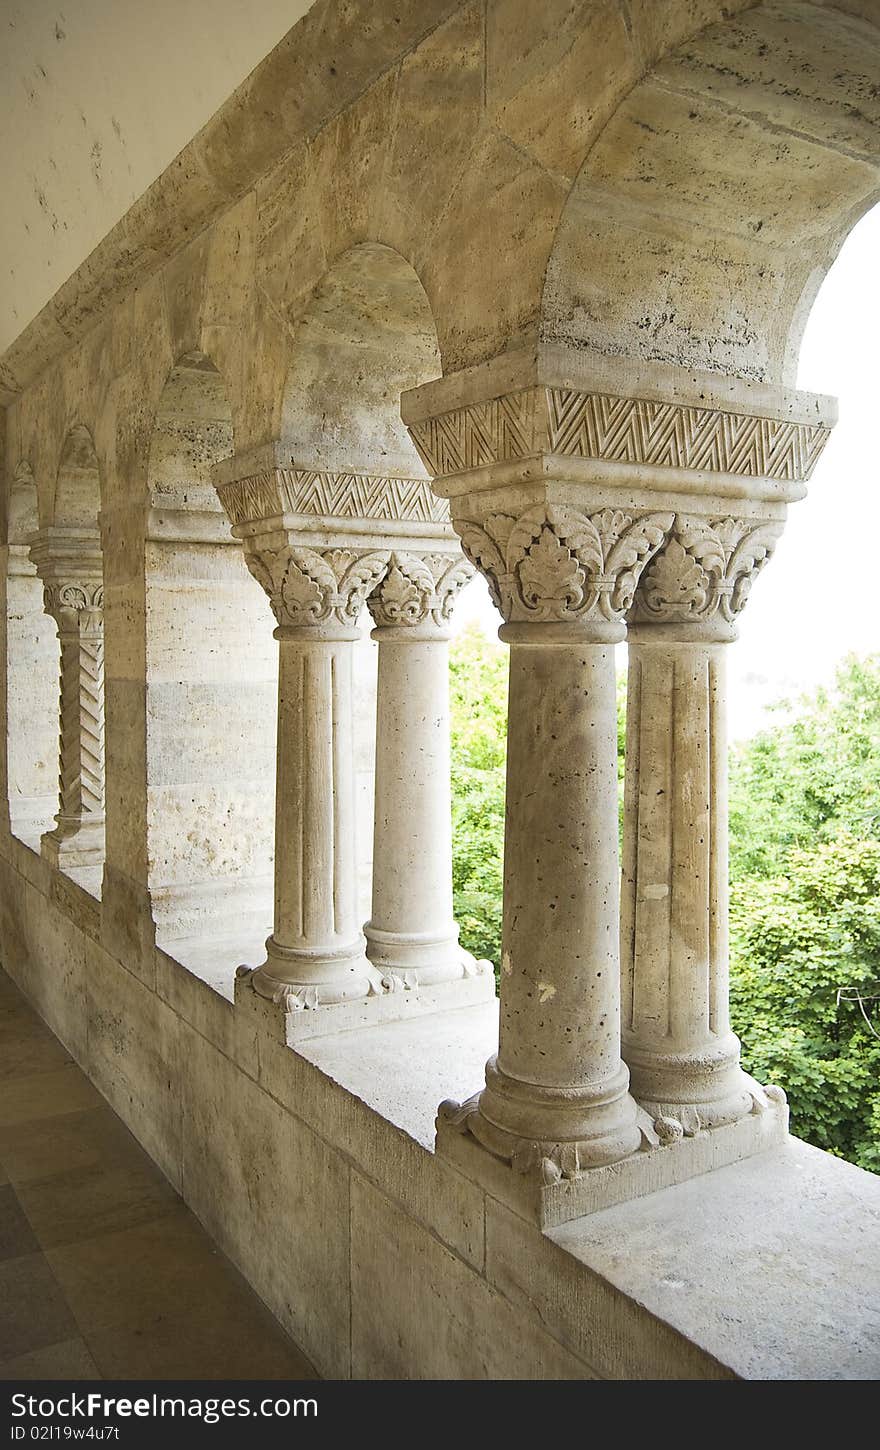 Classic architectural details with double columns and arcs